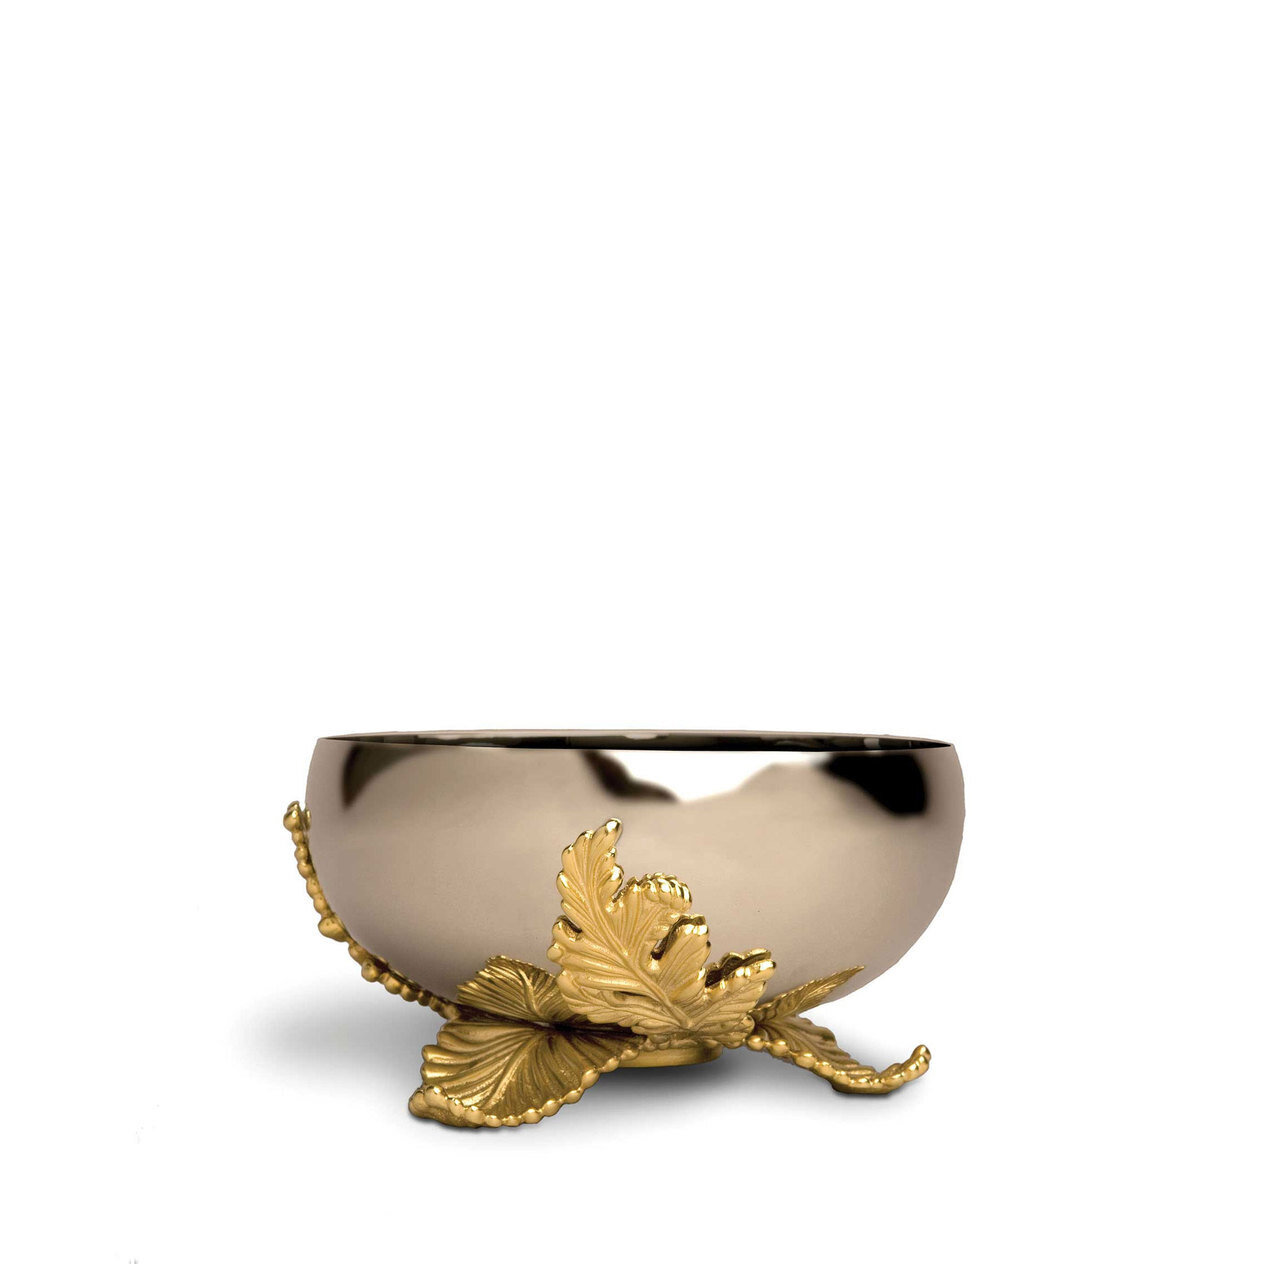 L'Objet Lamina Small Bowl Handcrafted Stainless Steel with 24k Gold-Plated leaf accents.